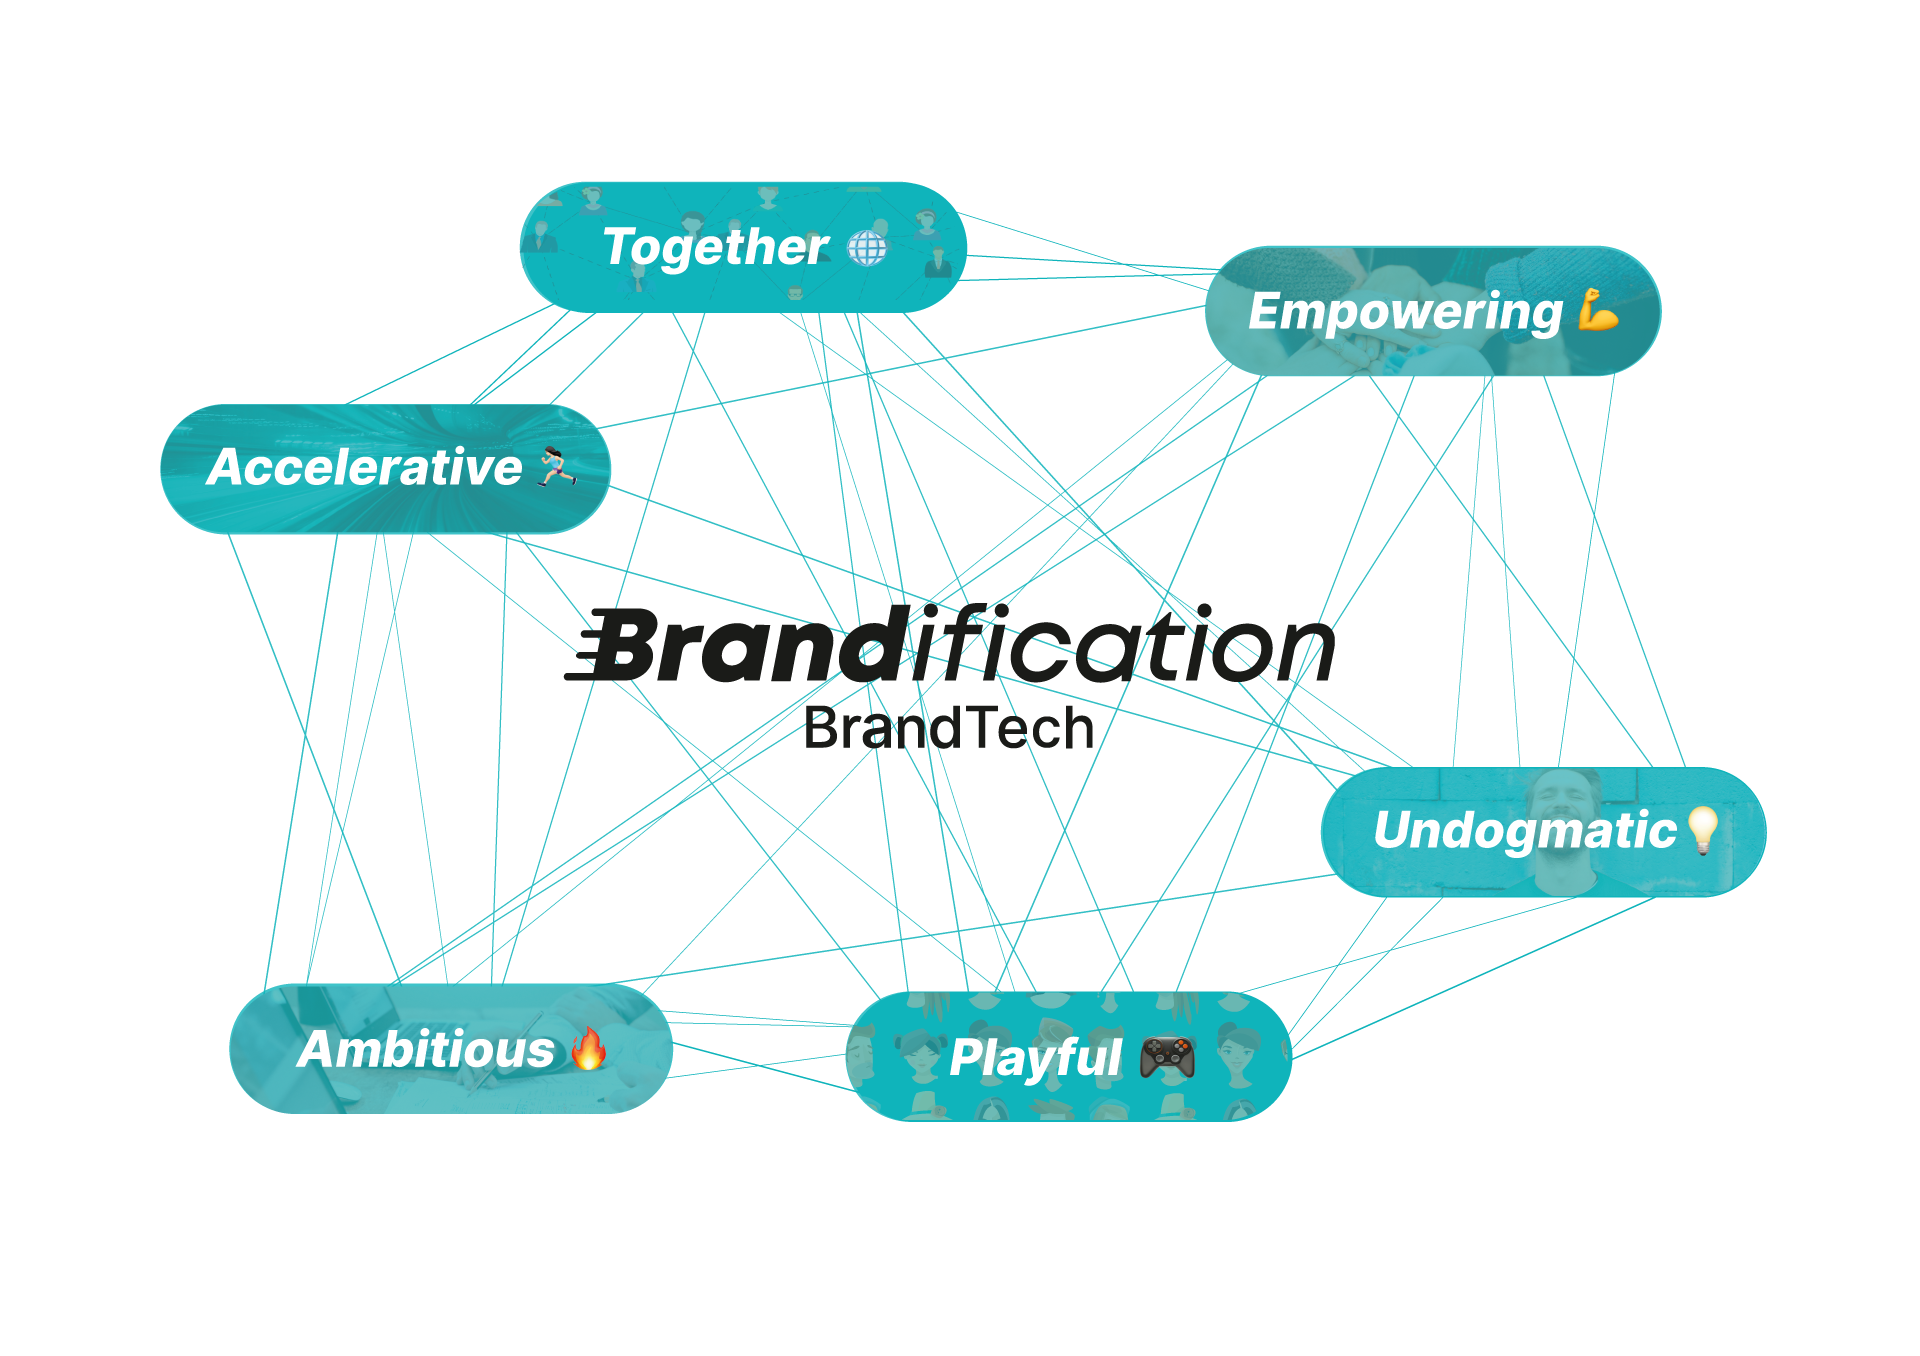 Brand values from Brandification